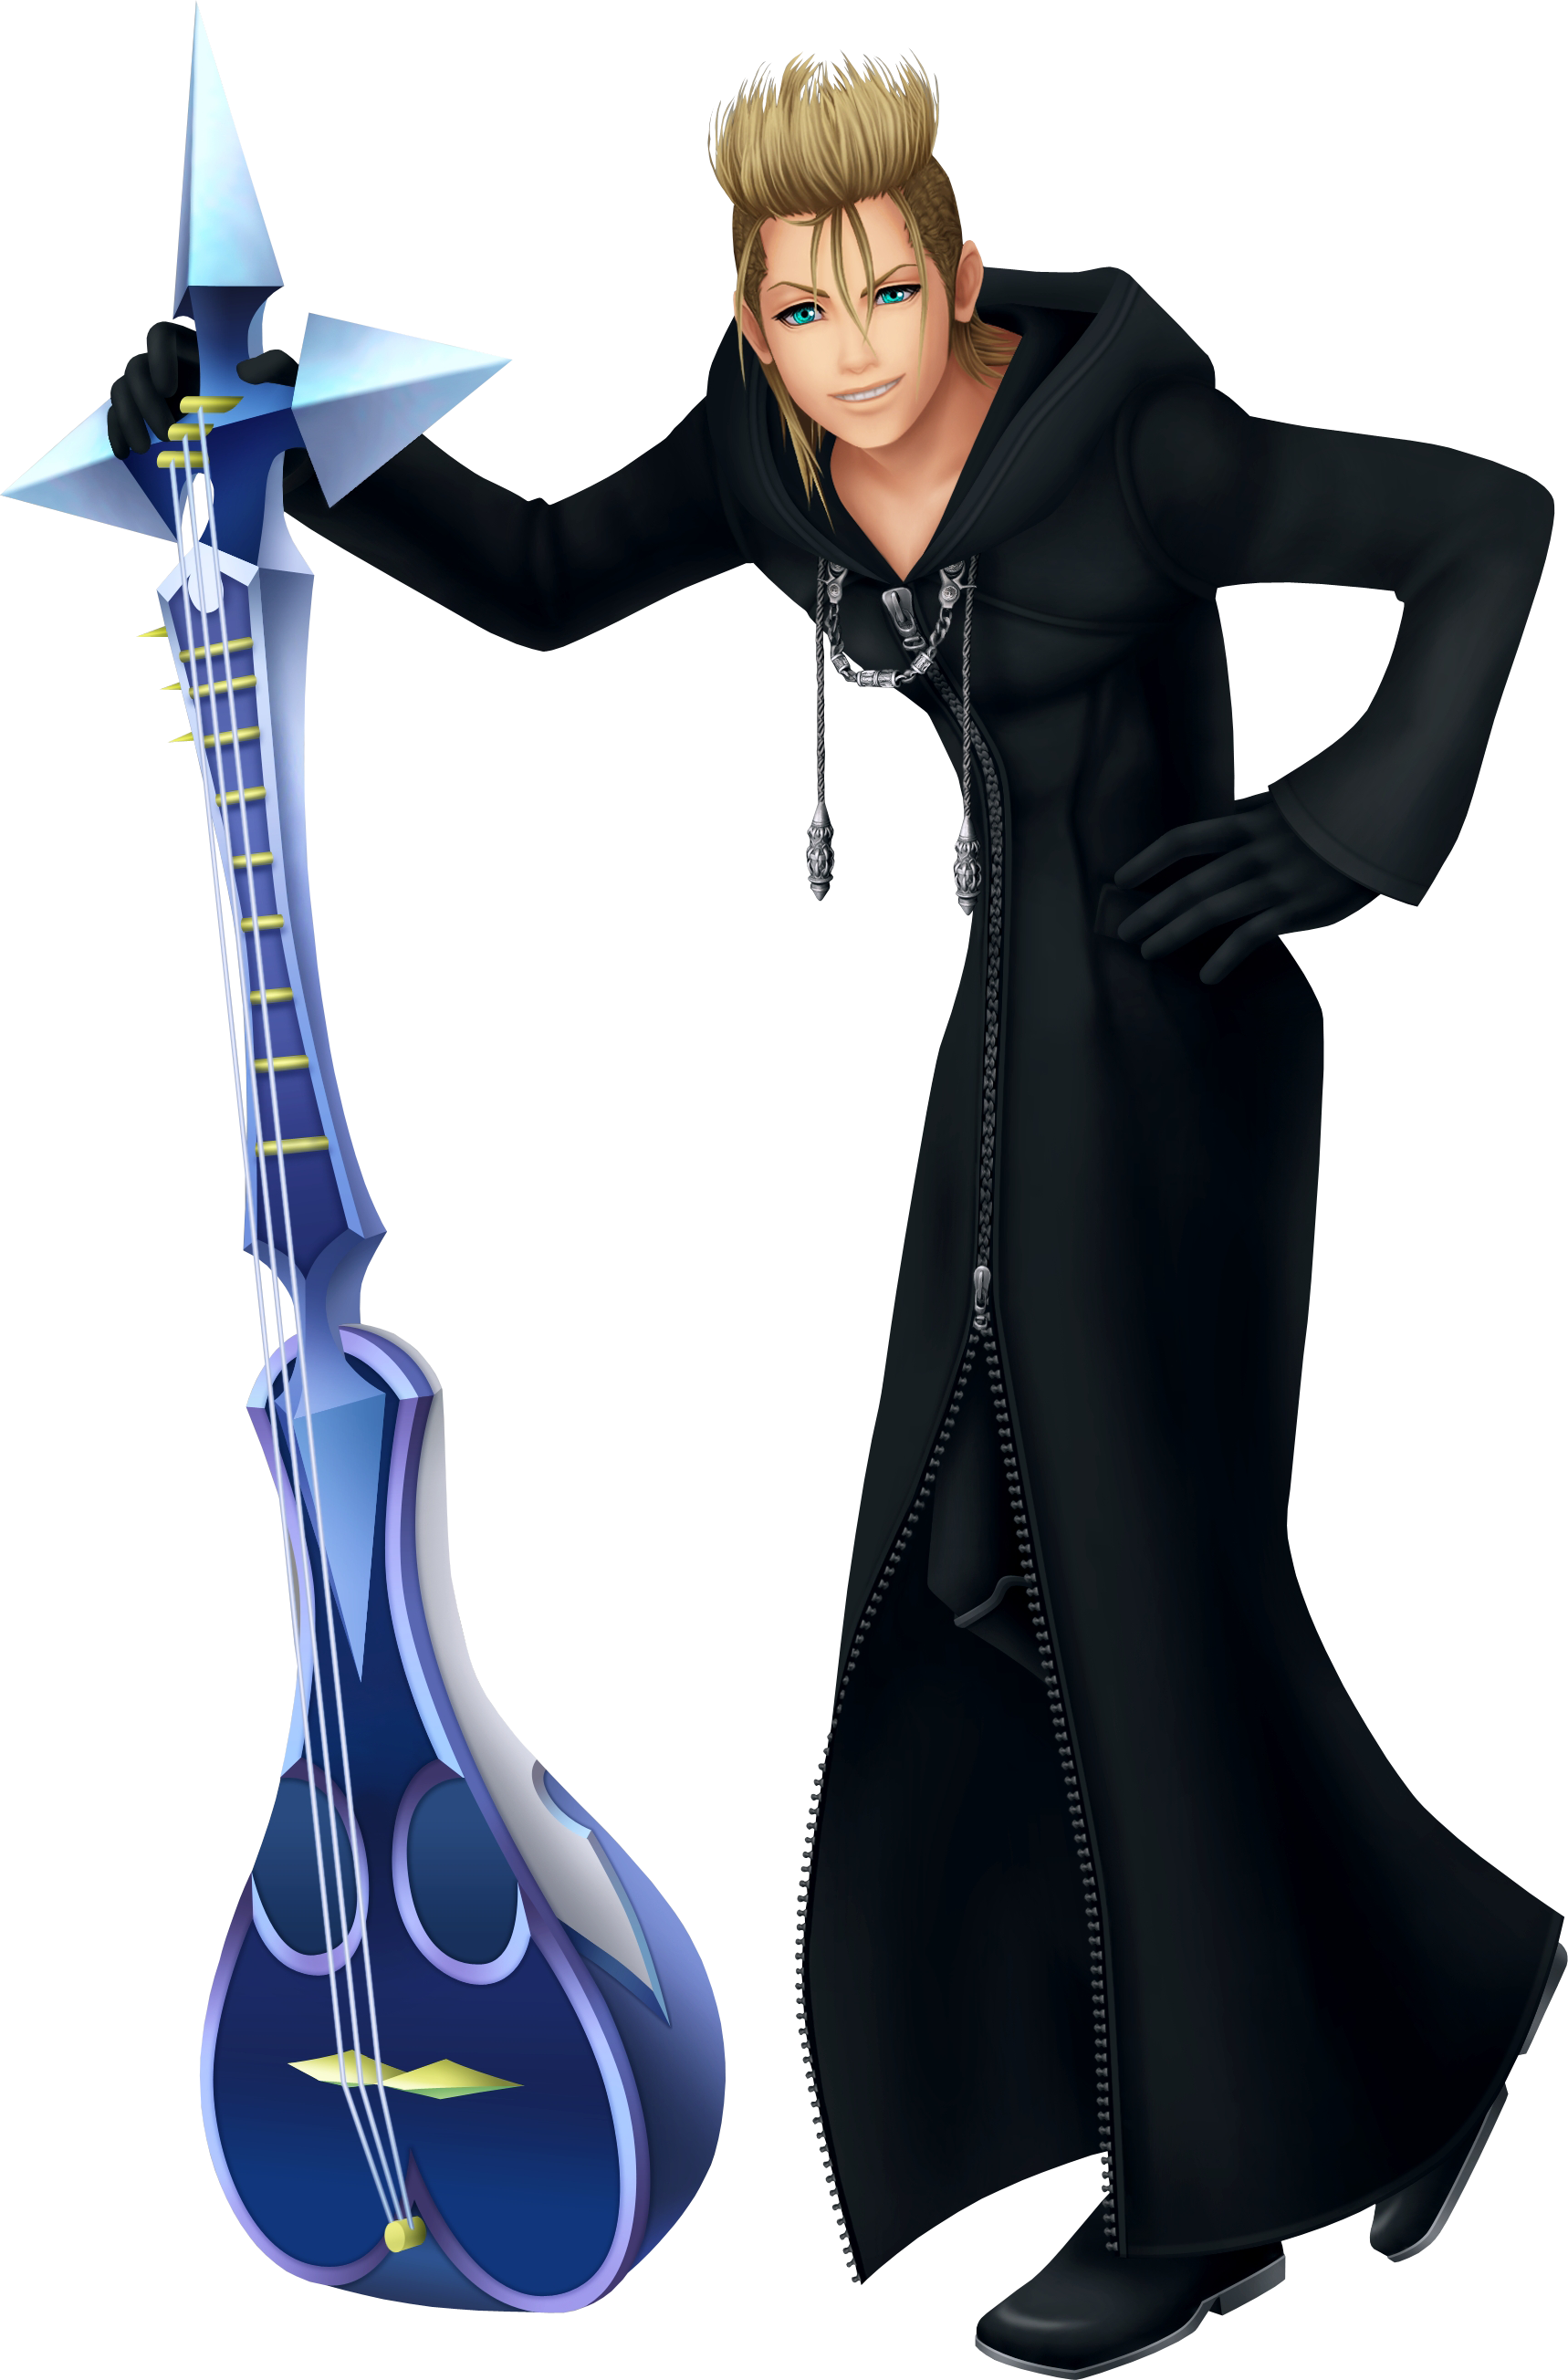 http://images3.wikia.nocookie.net/__cb20091121210538/kingdomhearts/fr/images/5/51/Demyx_Days.png